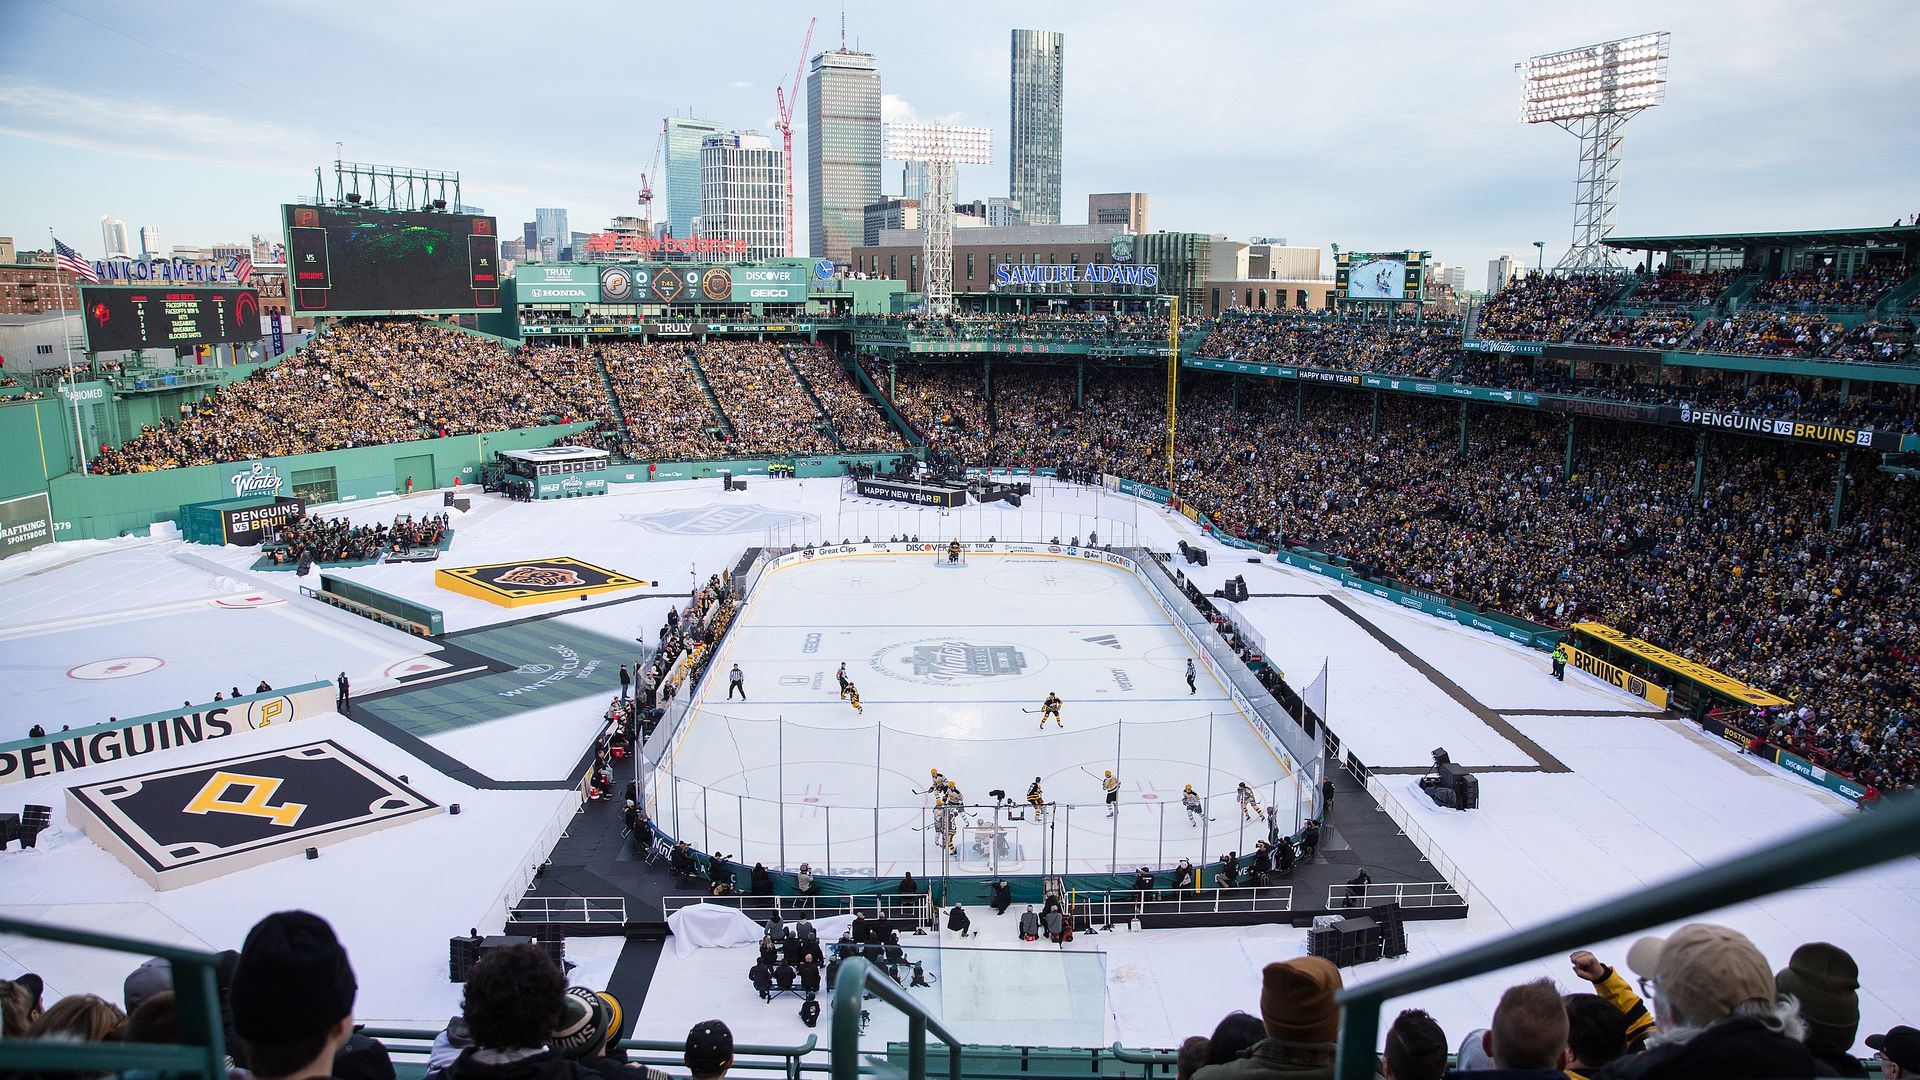 An ice rink sites upon Fenway Park's field during the Winter Classic. This is the view from the stands with the Prudential Center and other skyscrapers in the background.